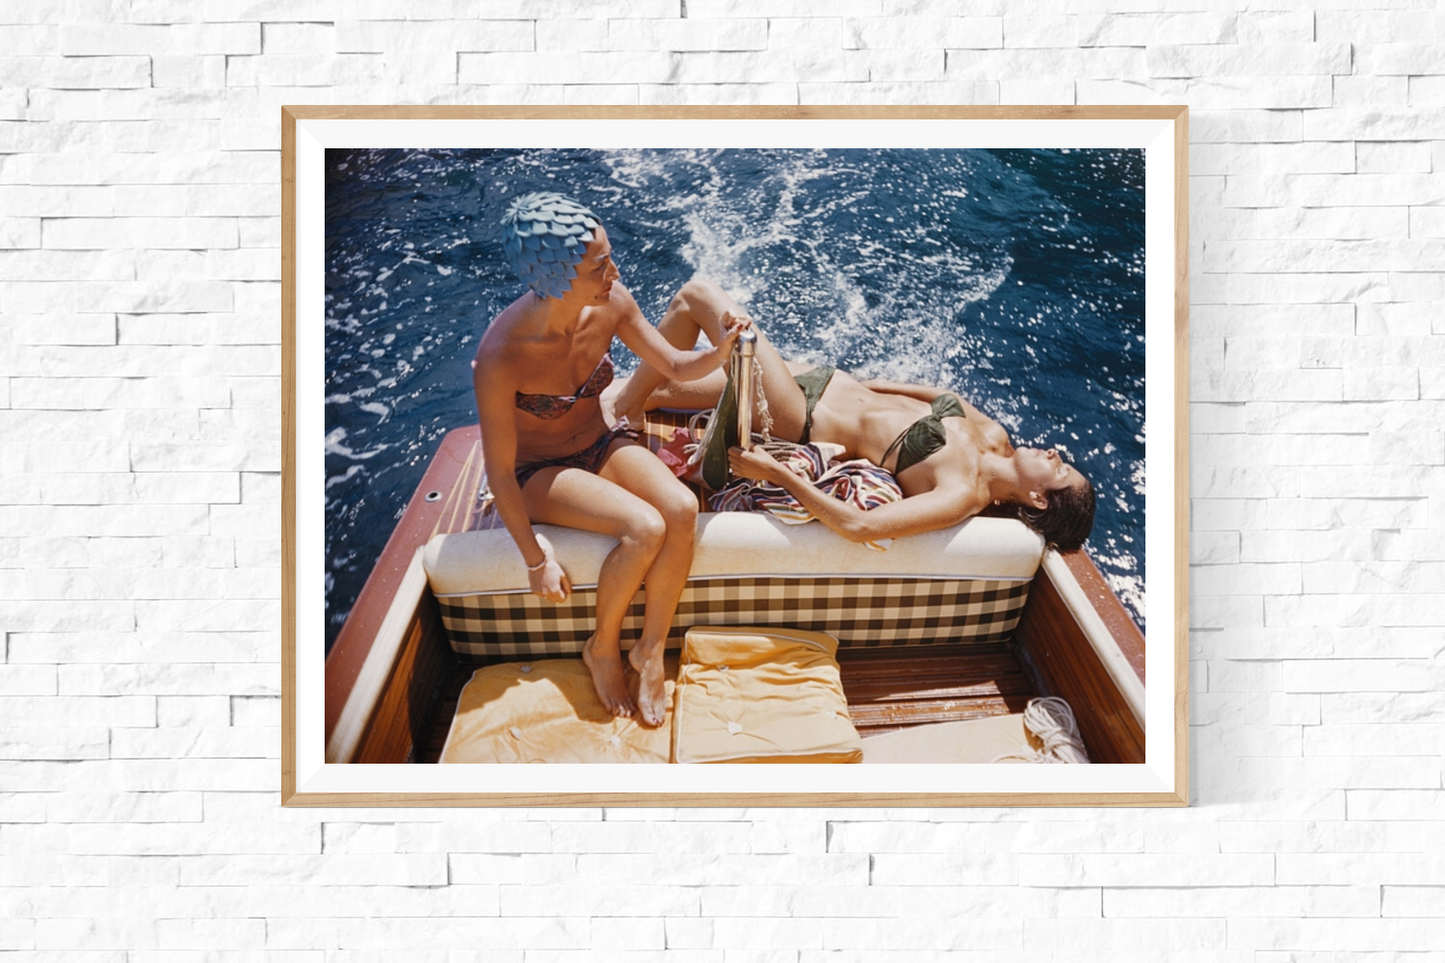 Framed Slim Aarons: Vuccino and Rava, Capri Italy,  photo for sale Getty Images Gallery